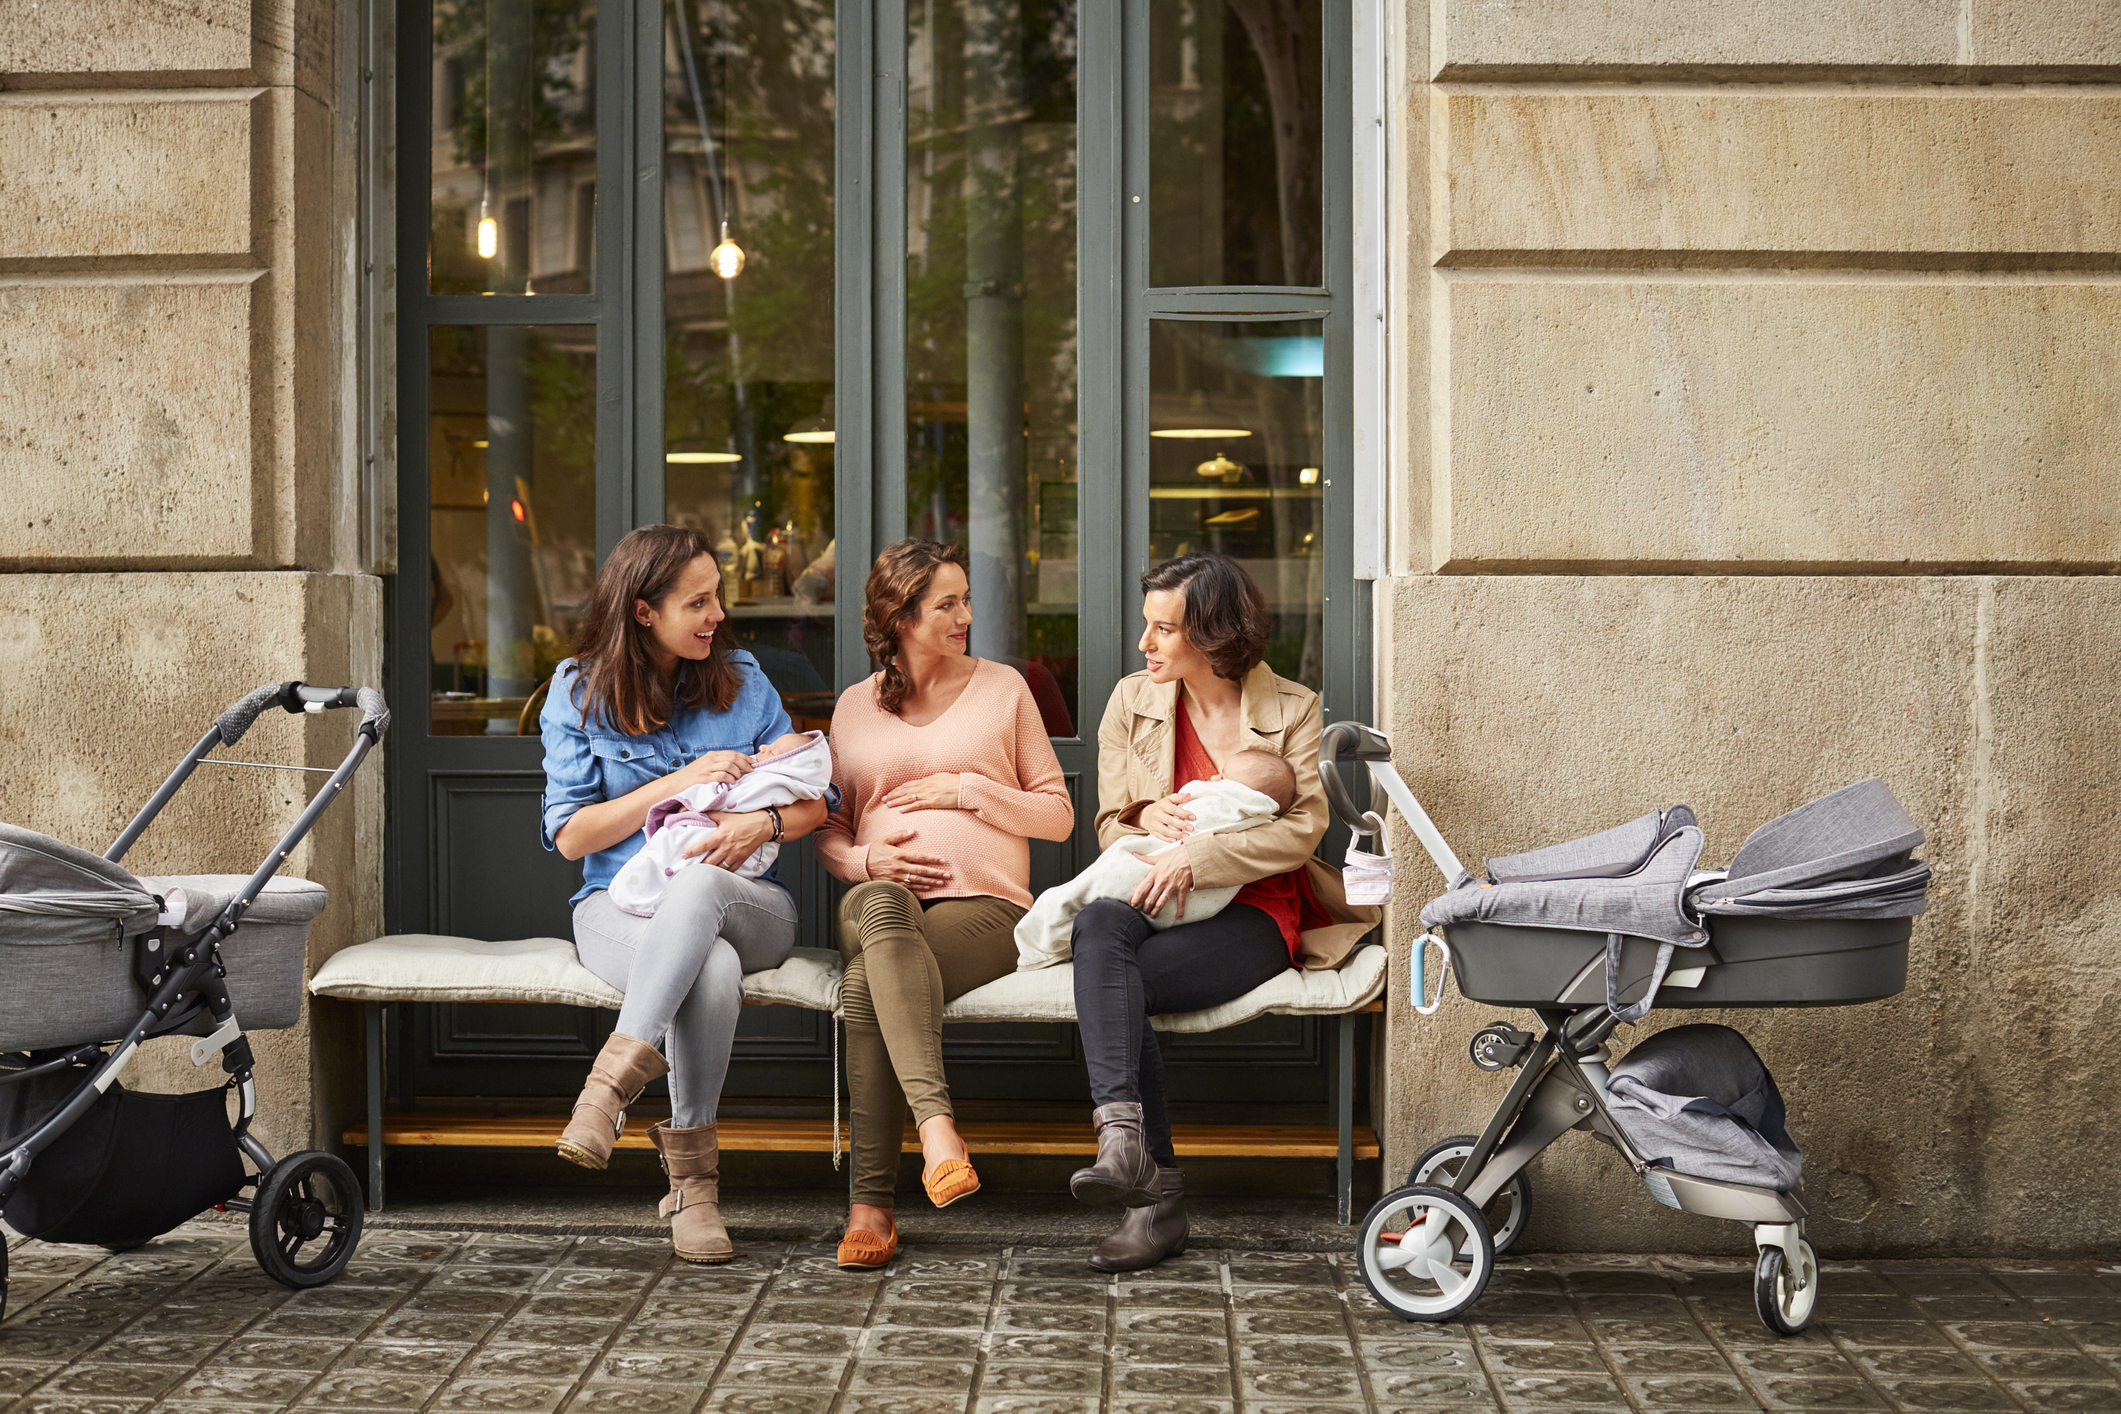 Women with babies on a bench